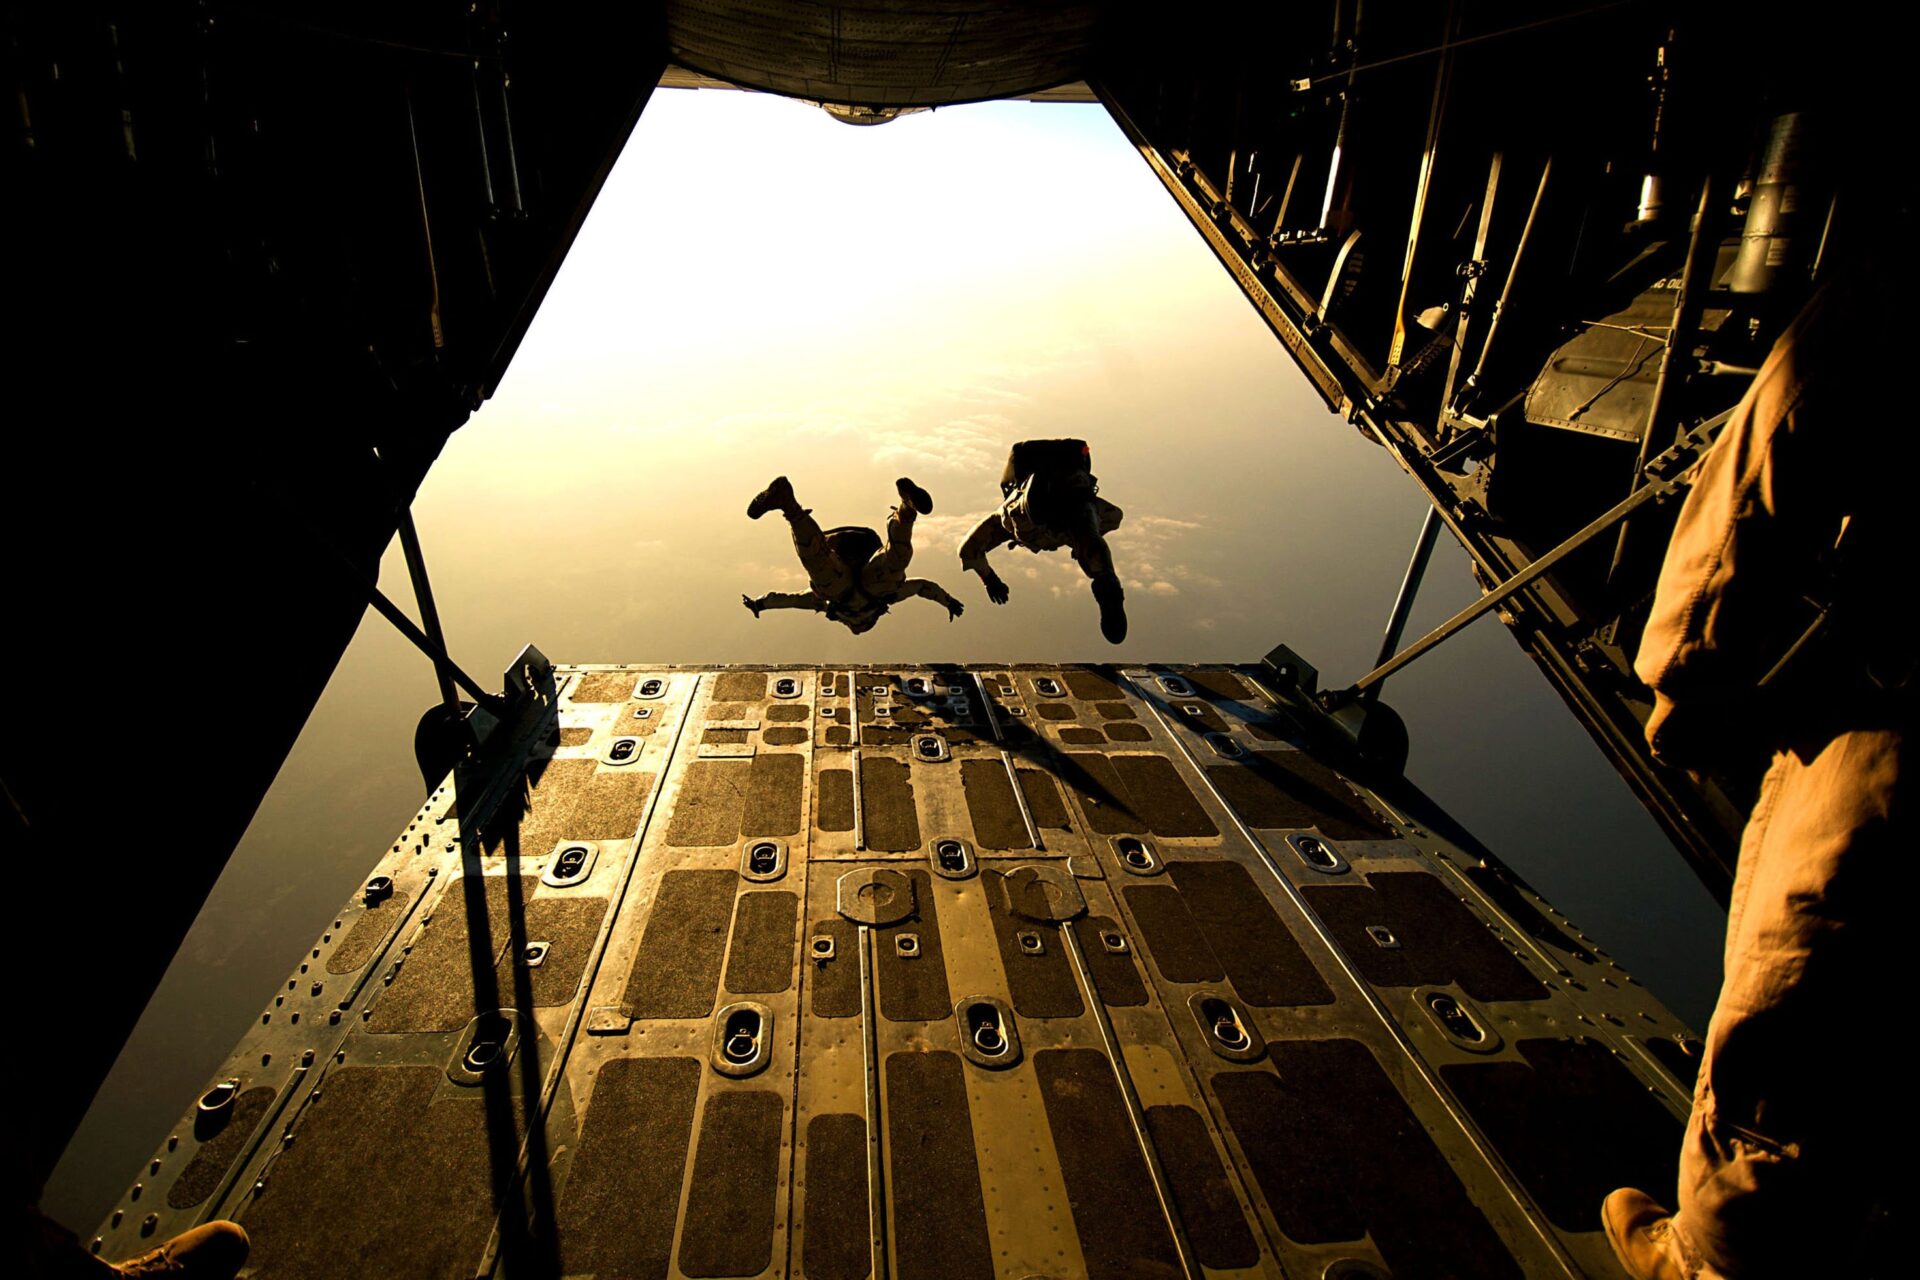 Skydivers exiting plane via rear ramp (Photo by Pixabay from Pexels)